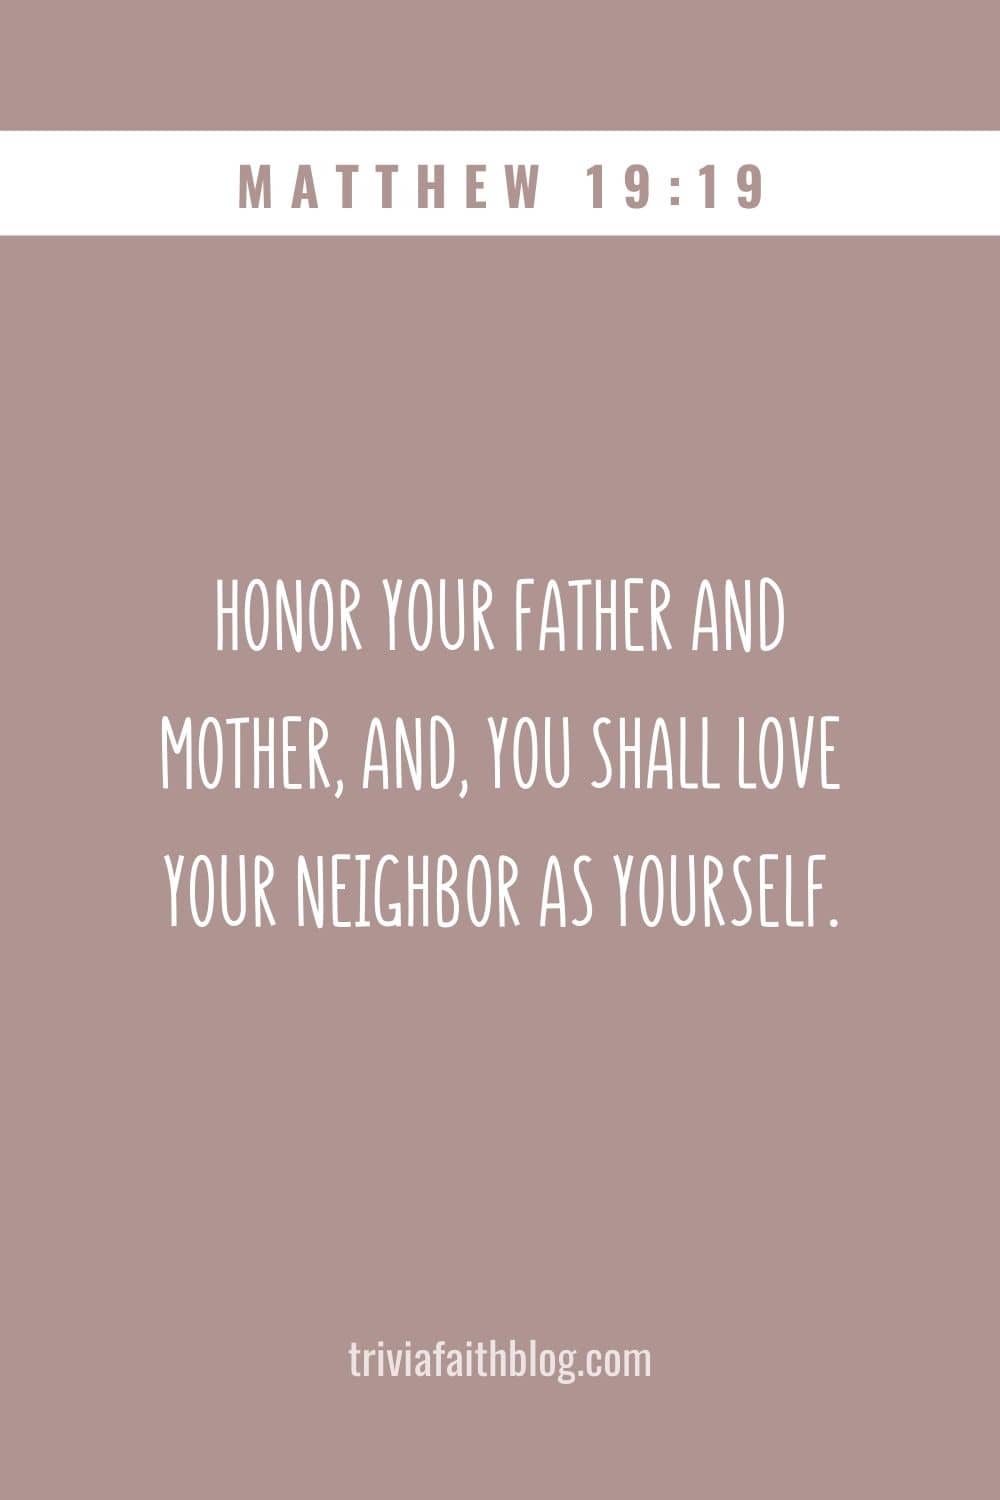 Honor your father and mother, and, You shall love your neighbor as yourself